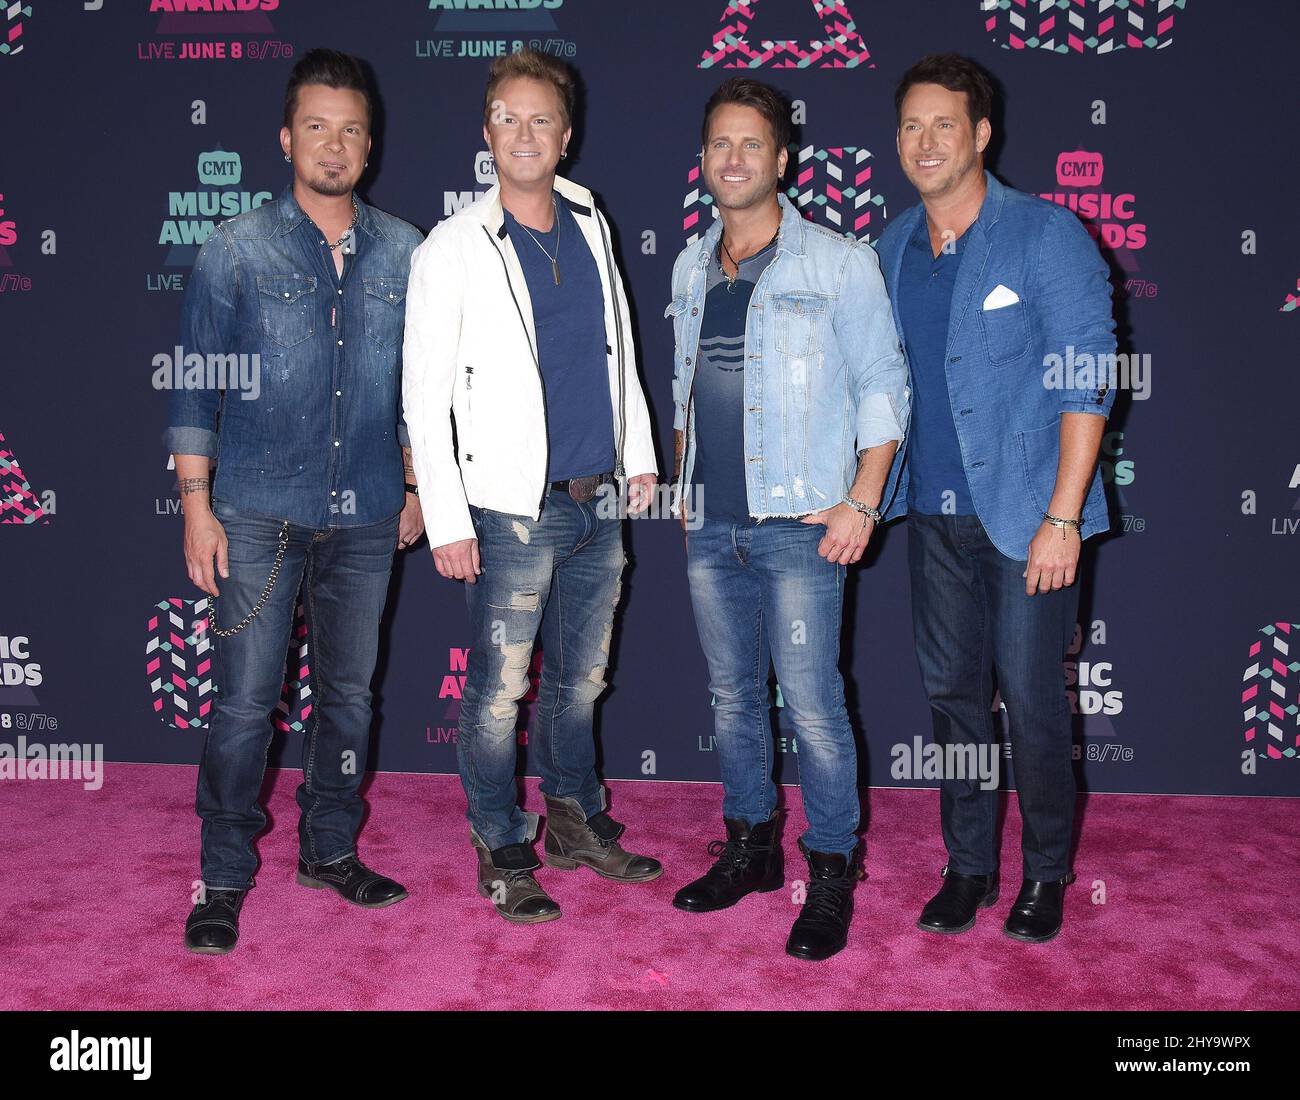 Parmalee attending the 2016 CMT Music Awards held at the Bridgestone Arena, Nashville, Tennessee. Stock Photo